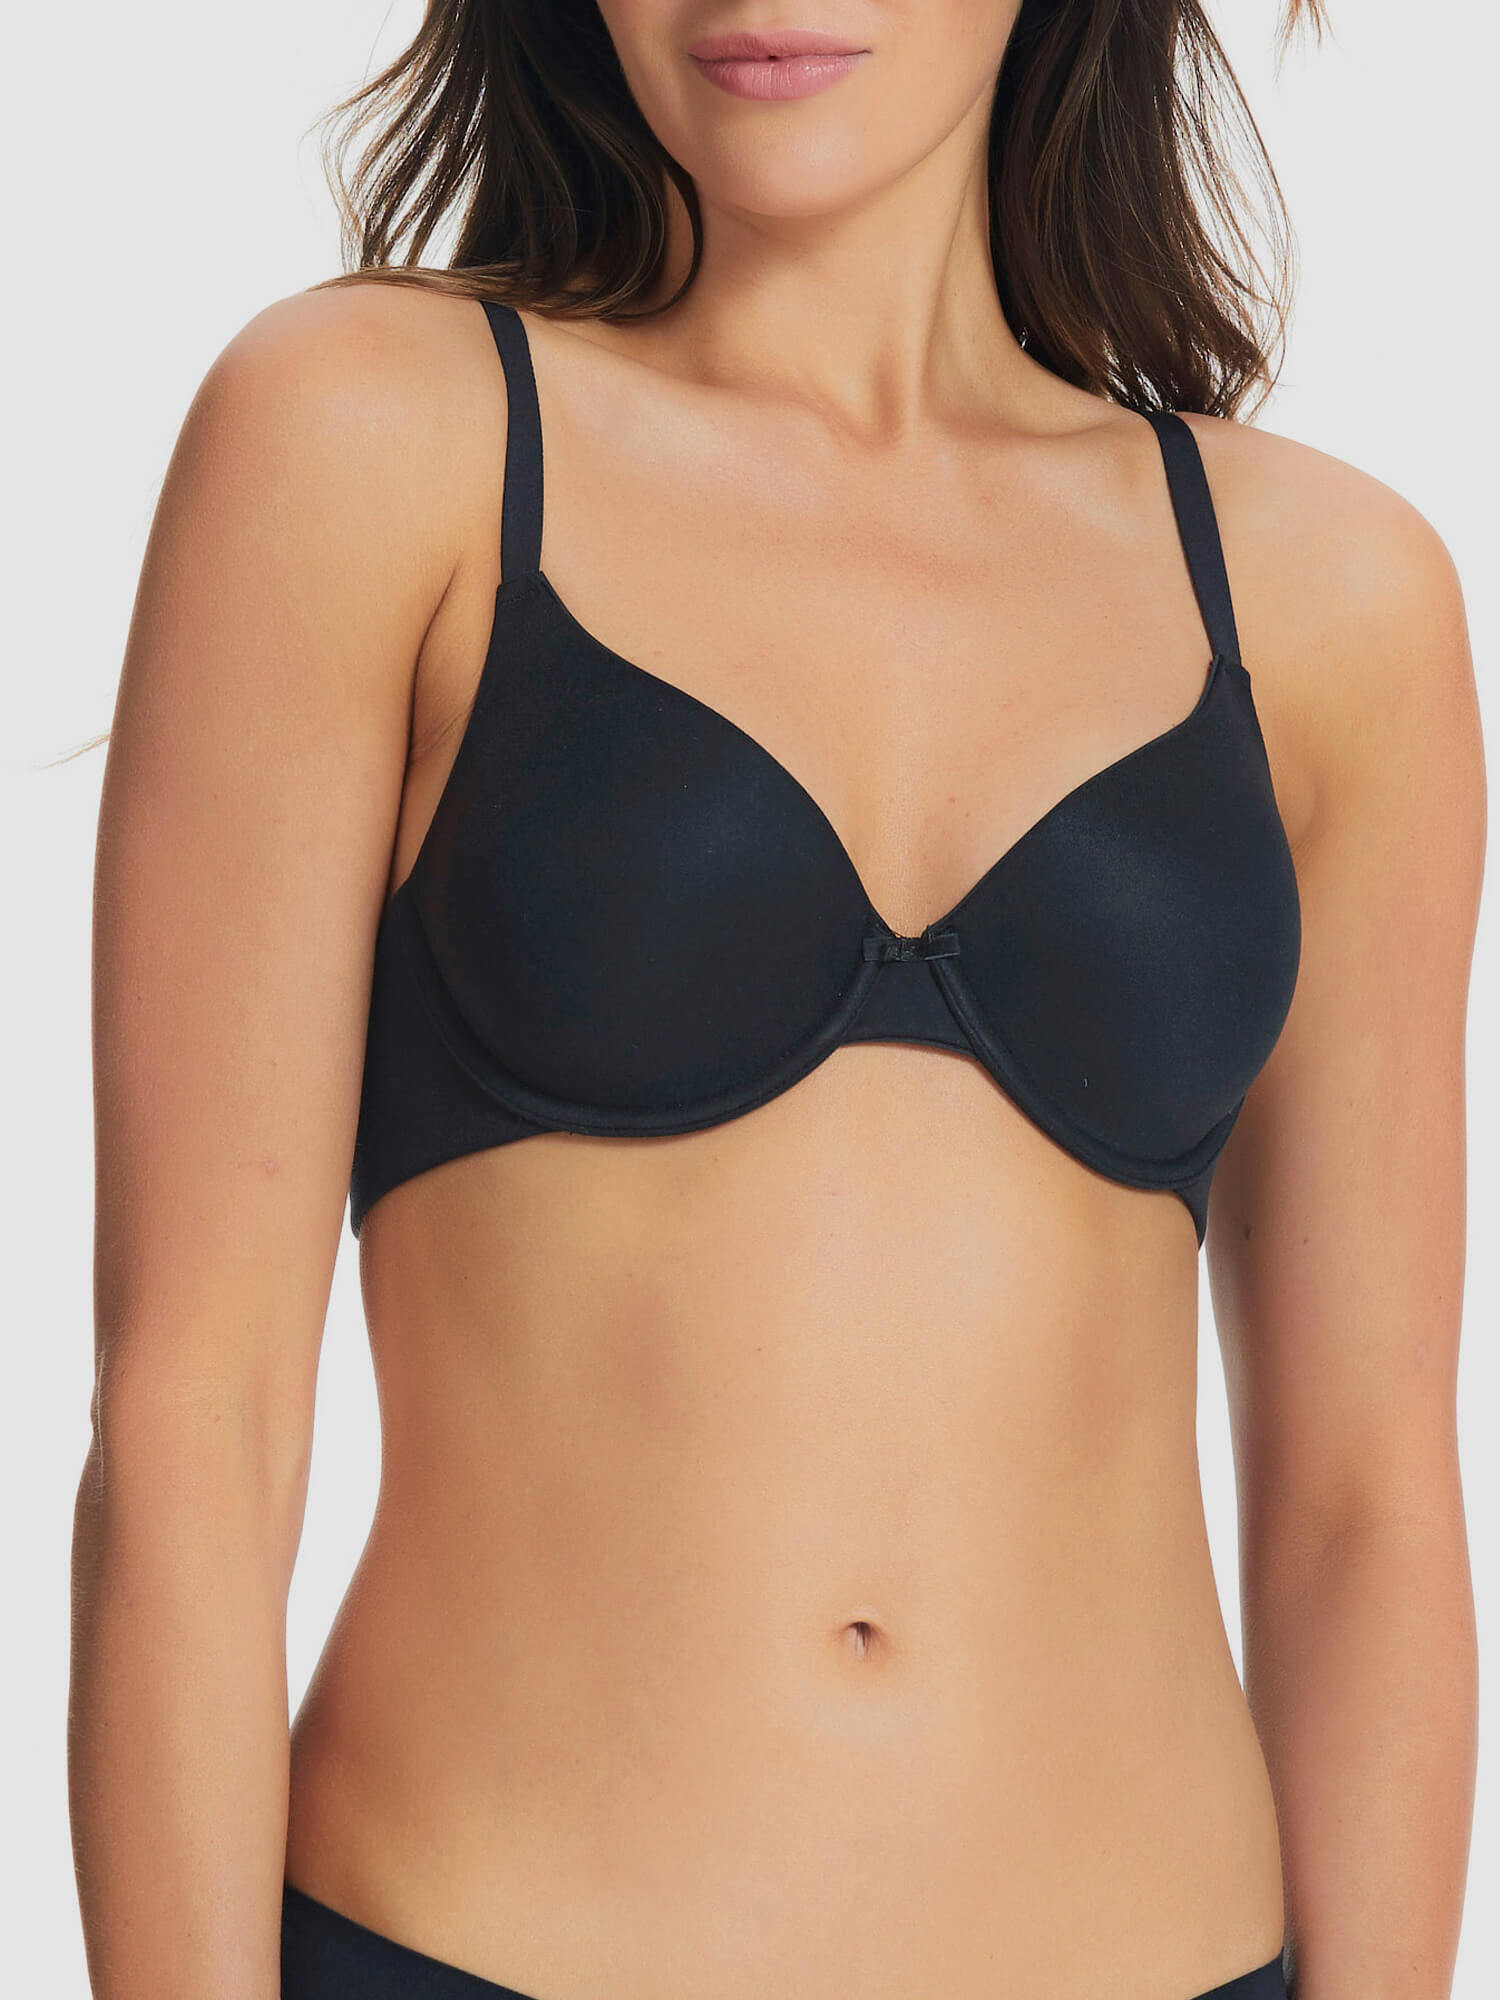 CALVIN KLEIN Light Memory Foam , Push-Up, Plunge with memory